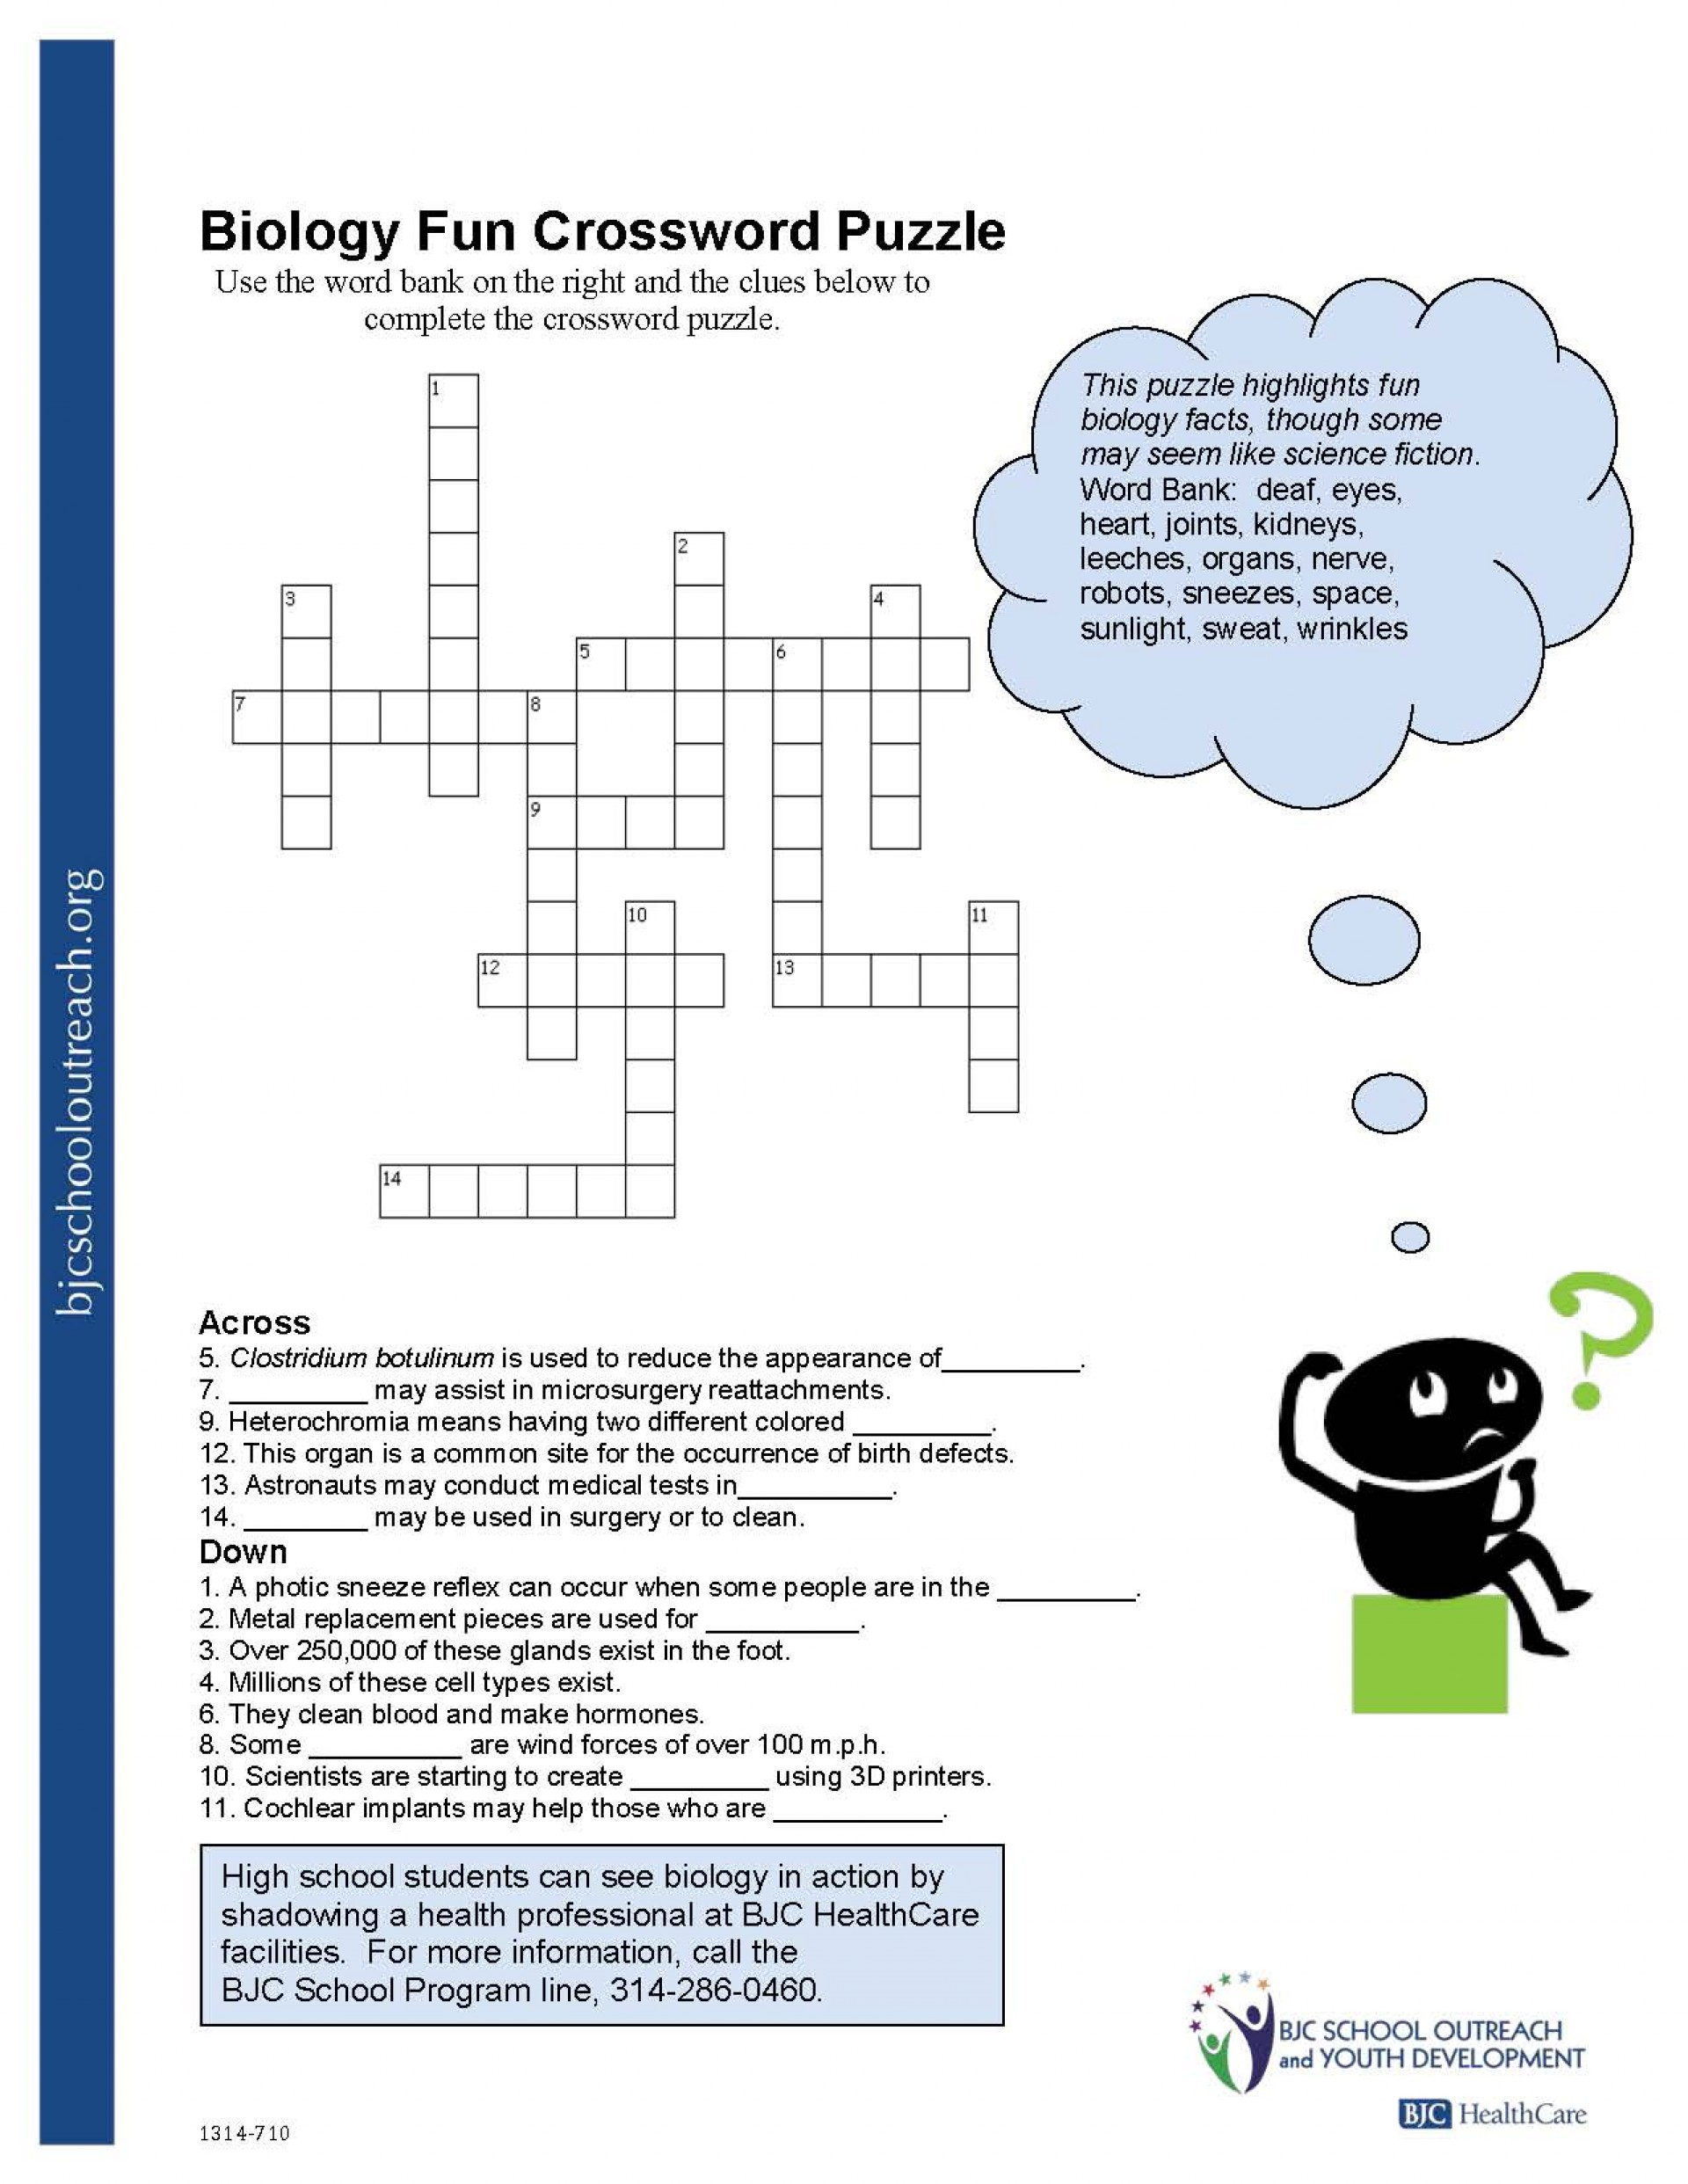 Crosswords Crossword Puzzle Worksheets For Middle School Biology Fun - Printable Crossword Puzzles With Word Bank